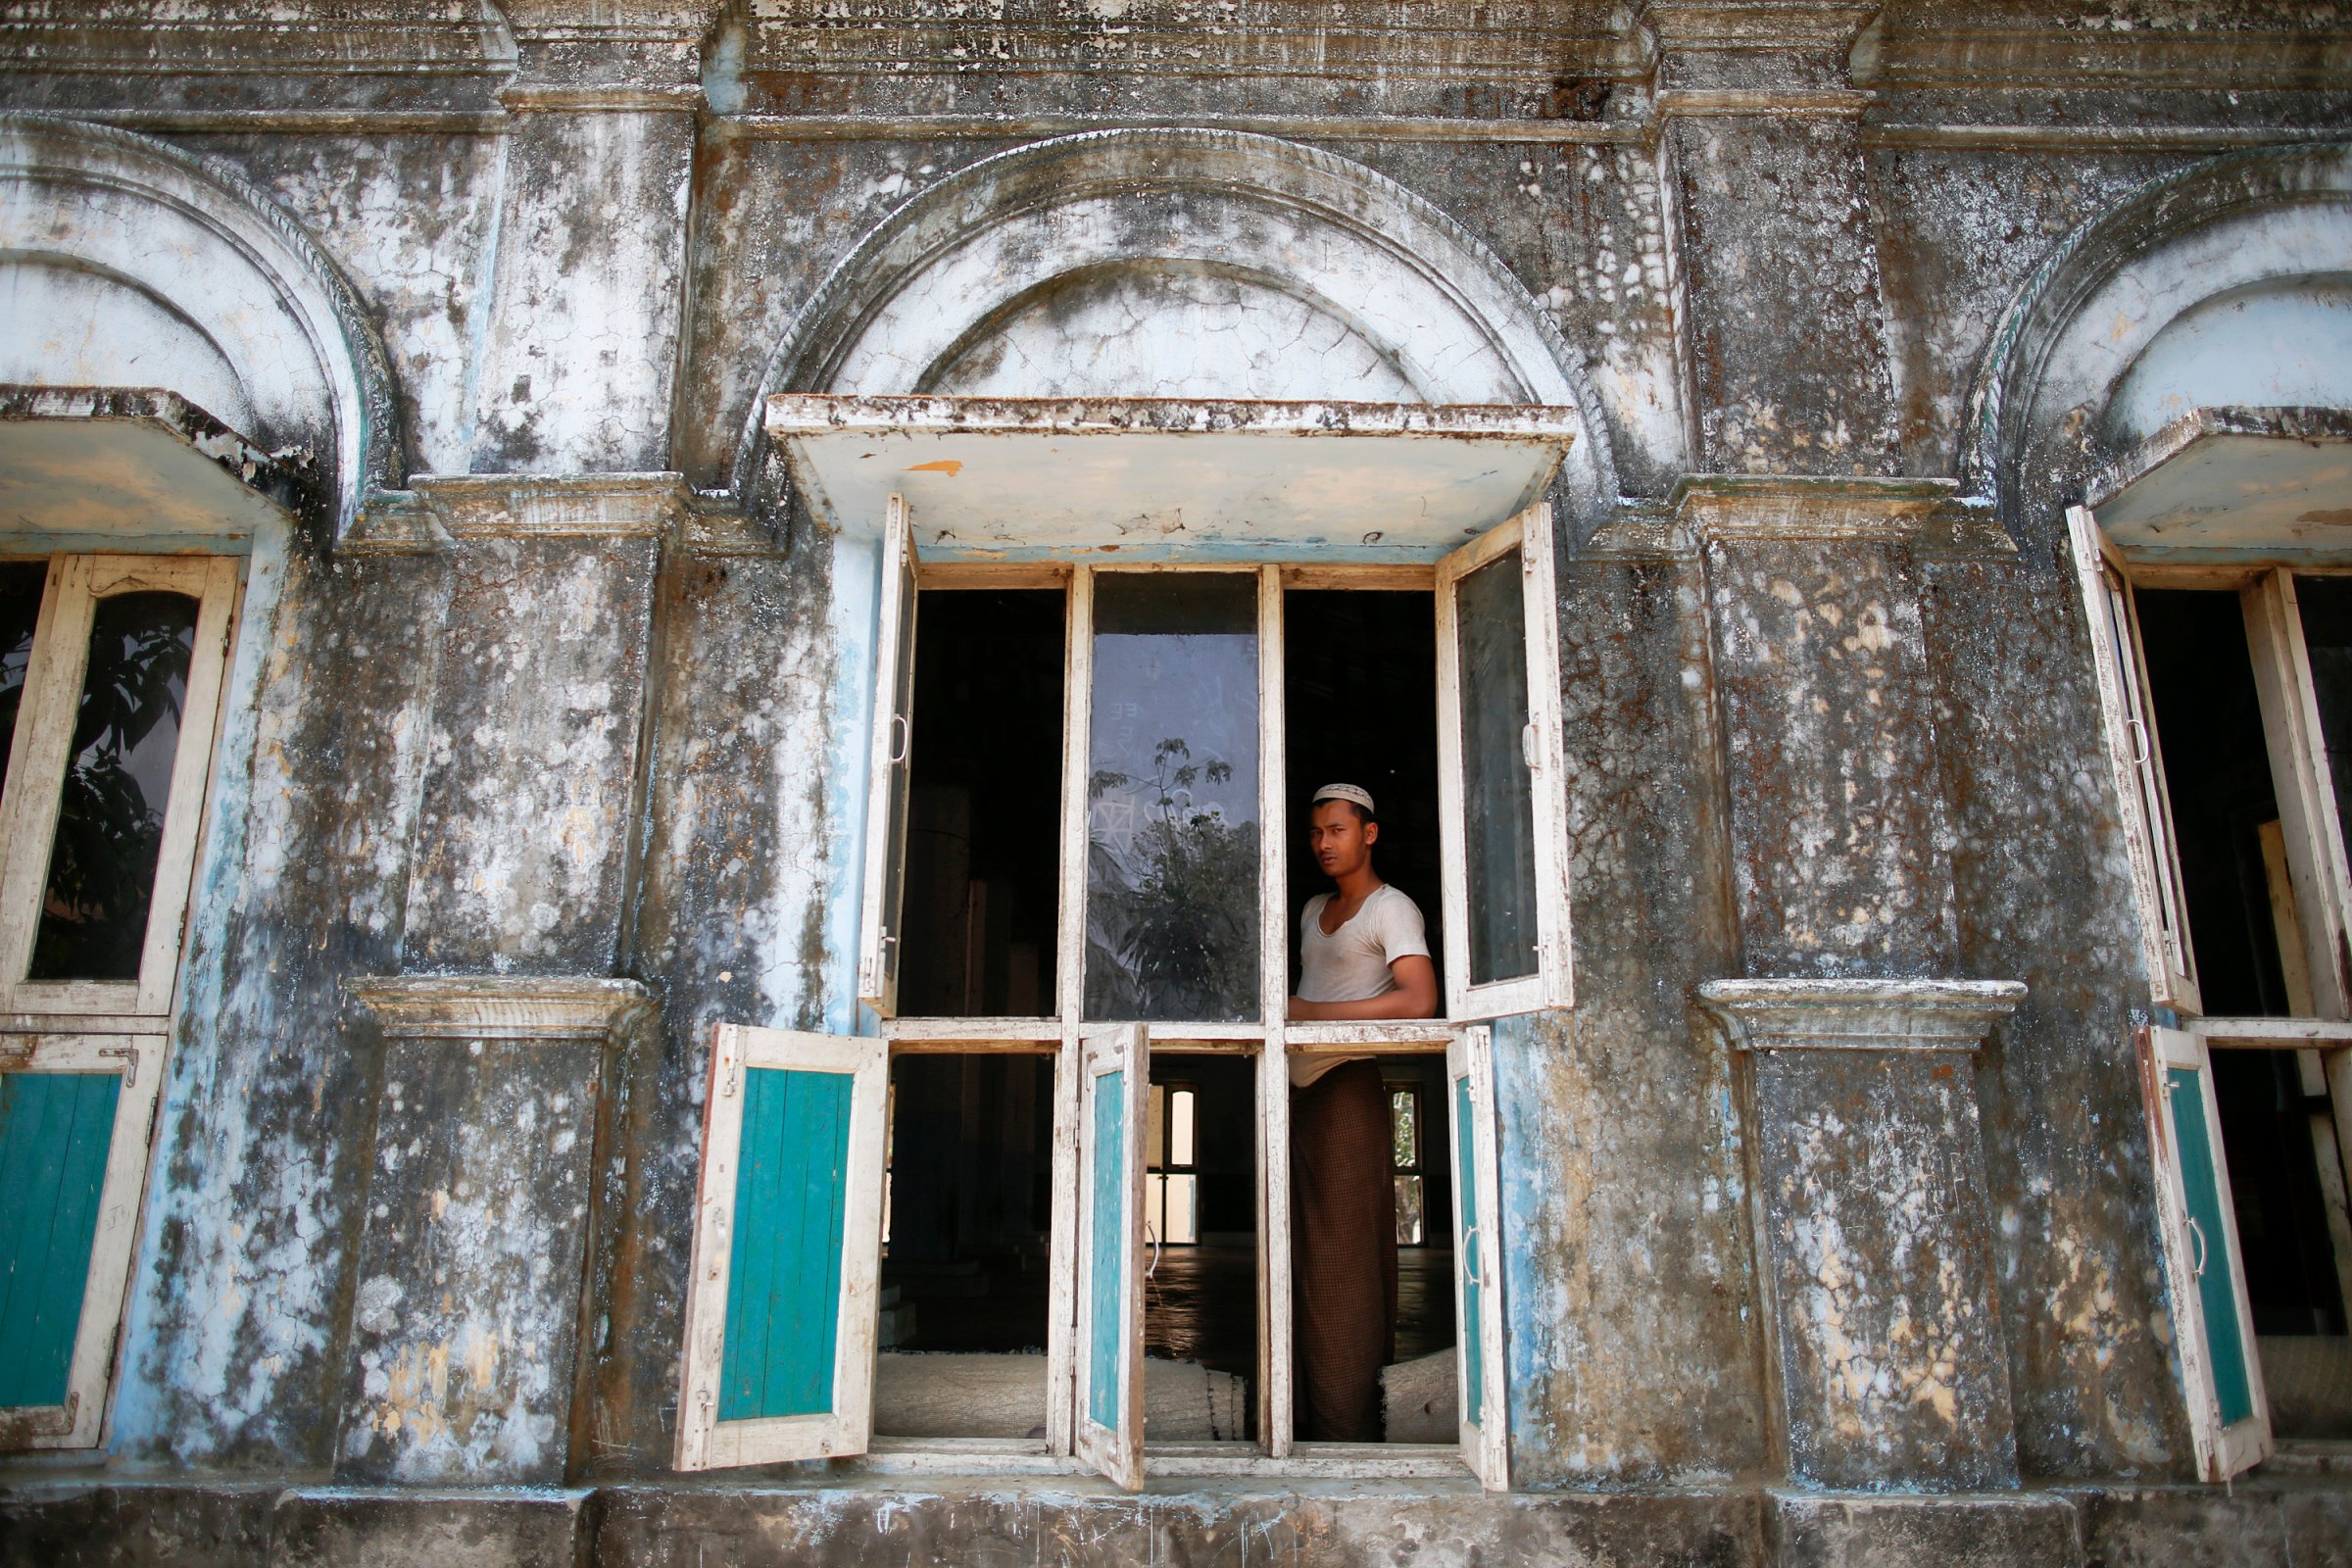 A Rohingya Muslim student stands at a window of a local mosque near Sittwe